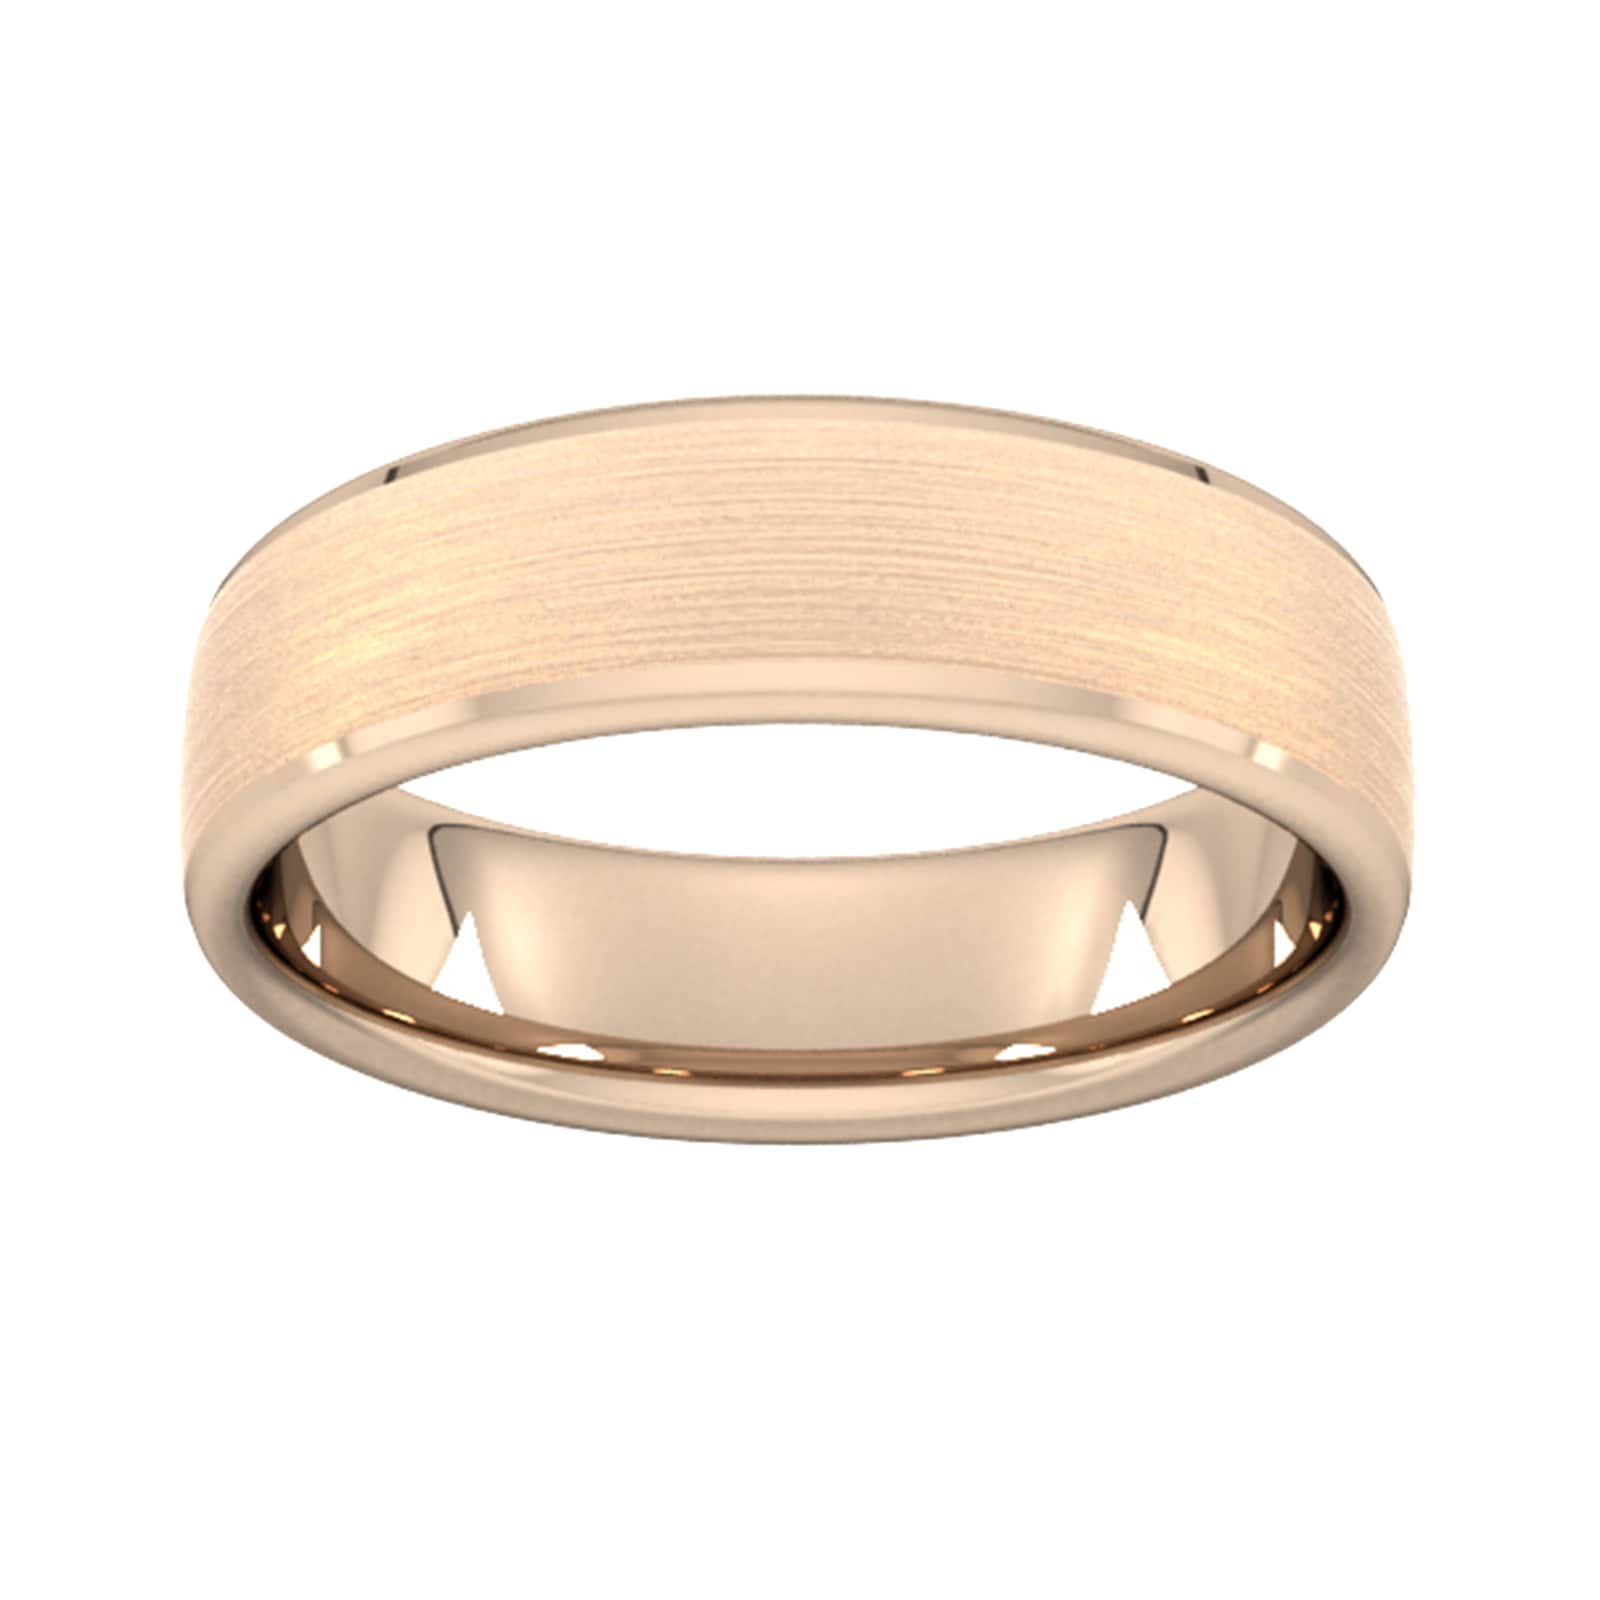 6mm Slight Court Standard Polished Chamfered Edges With Matt Centre Wedding Ring In 9 Carat Rose Gold - Ring Size K